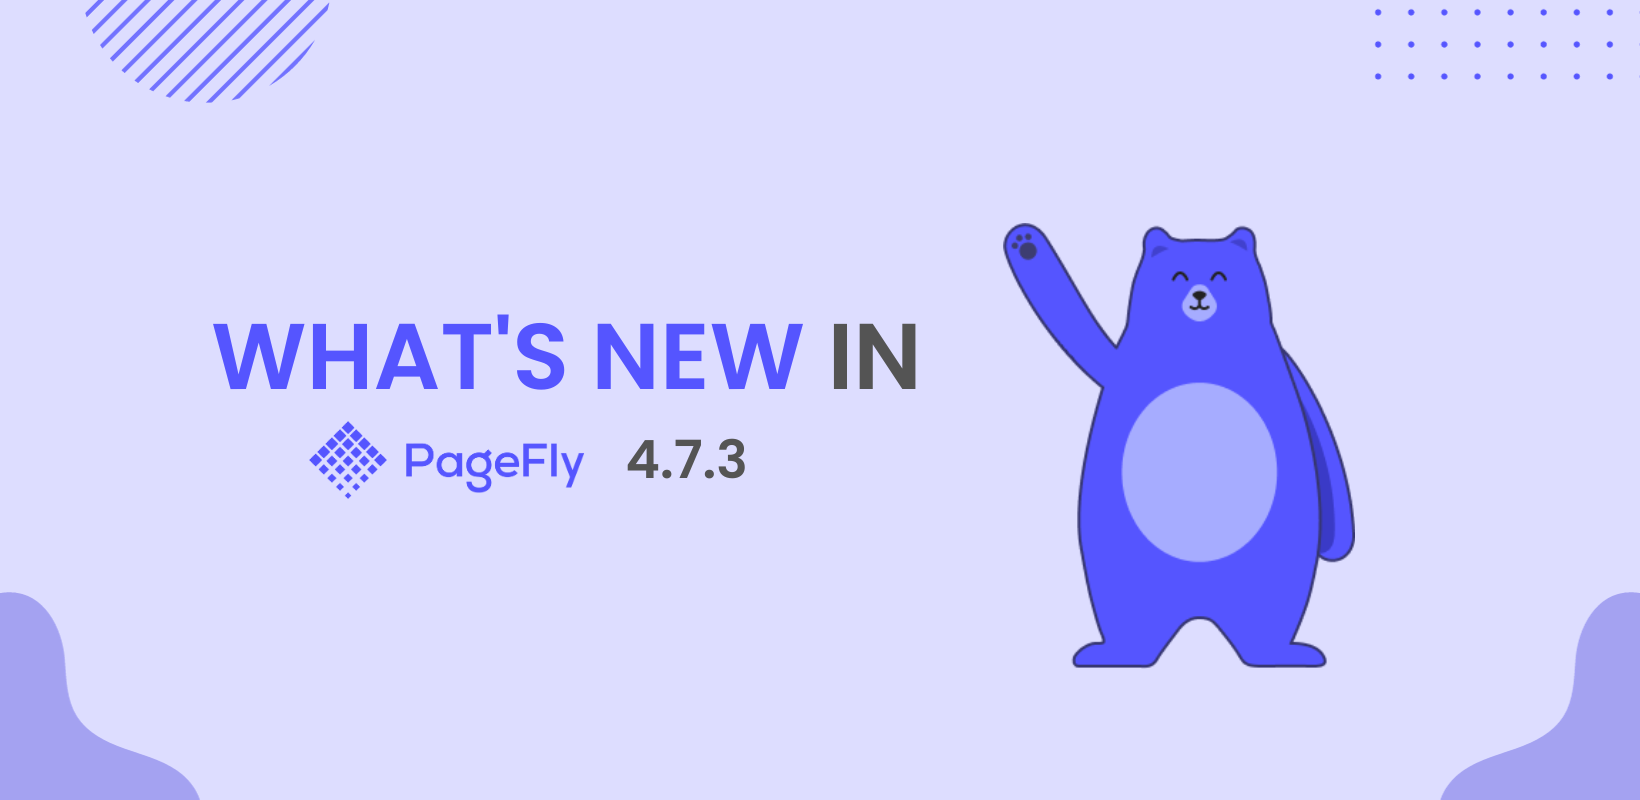 PageFly 4.7.3 : Skyrocket Sales for Holidays. Personalize Customers Orders. Grow Their Trust.